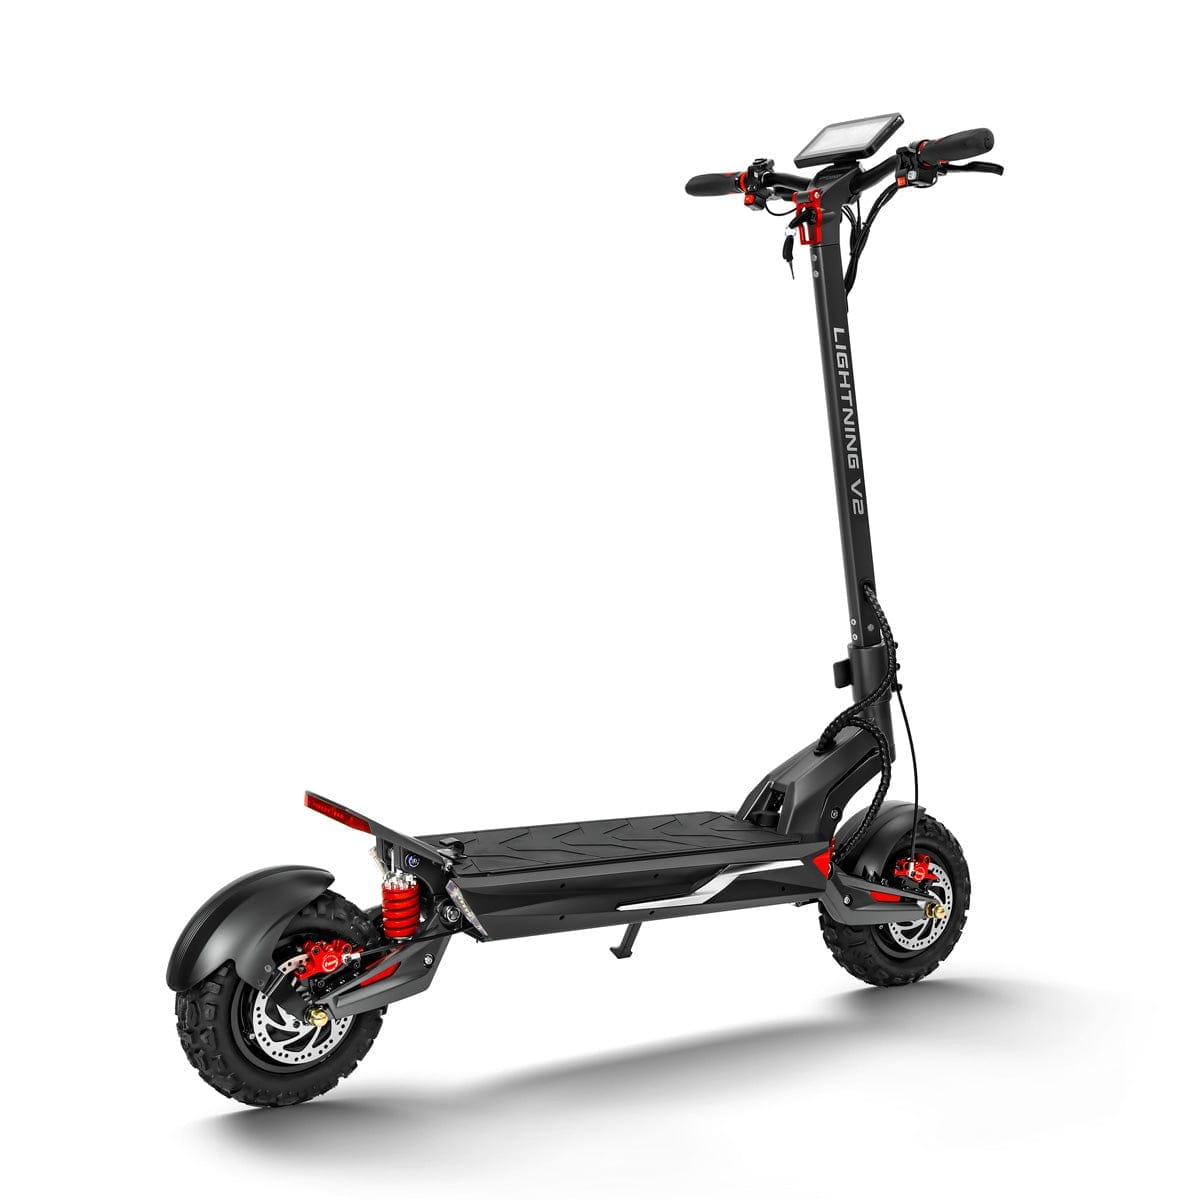 LIGHTNING V2 - DUAL MOTOR HIGH PERFORMANCE ELECTRIC SCOOTER Max 4000 watts PEAK POWER - Bike Scooter City